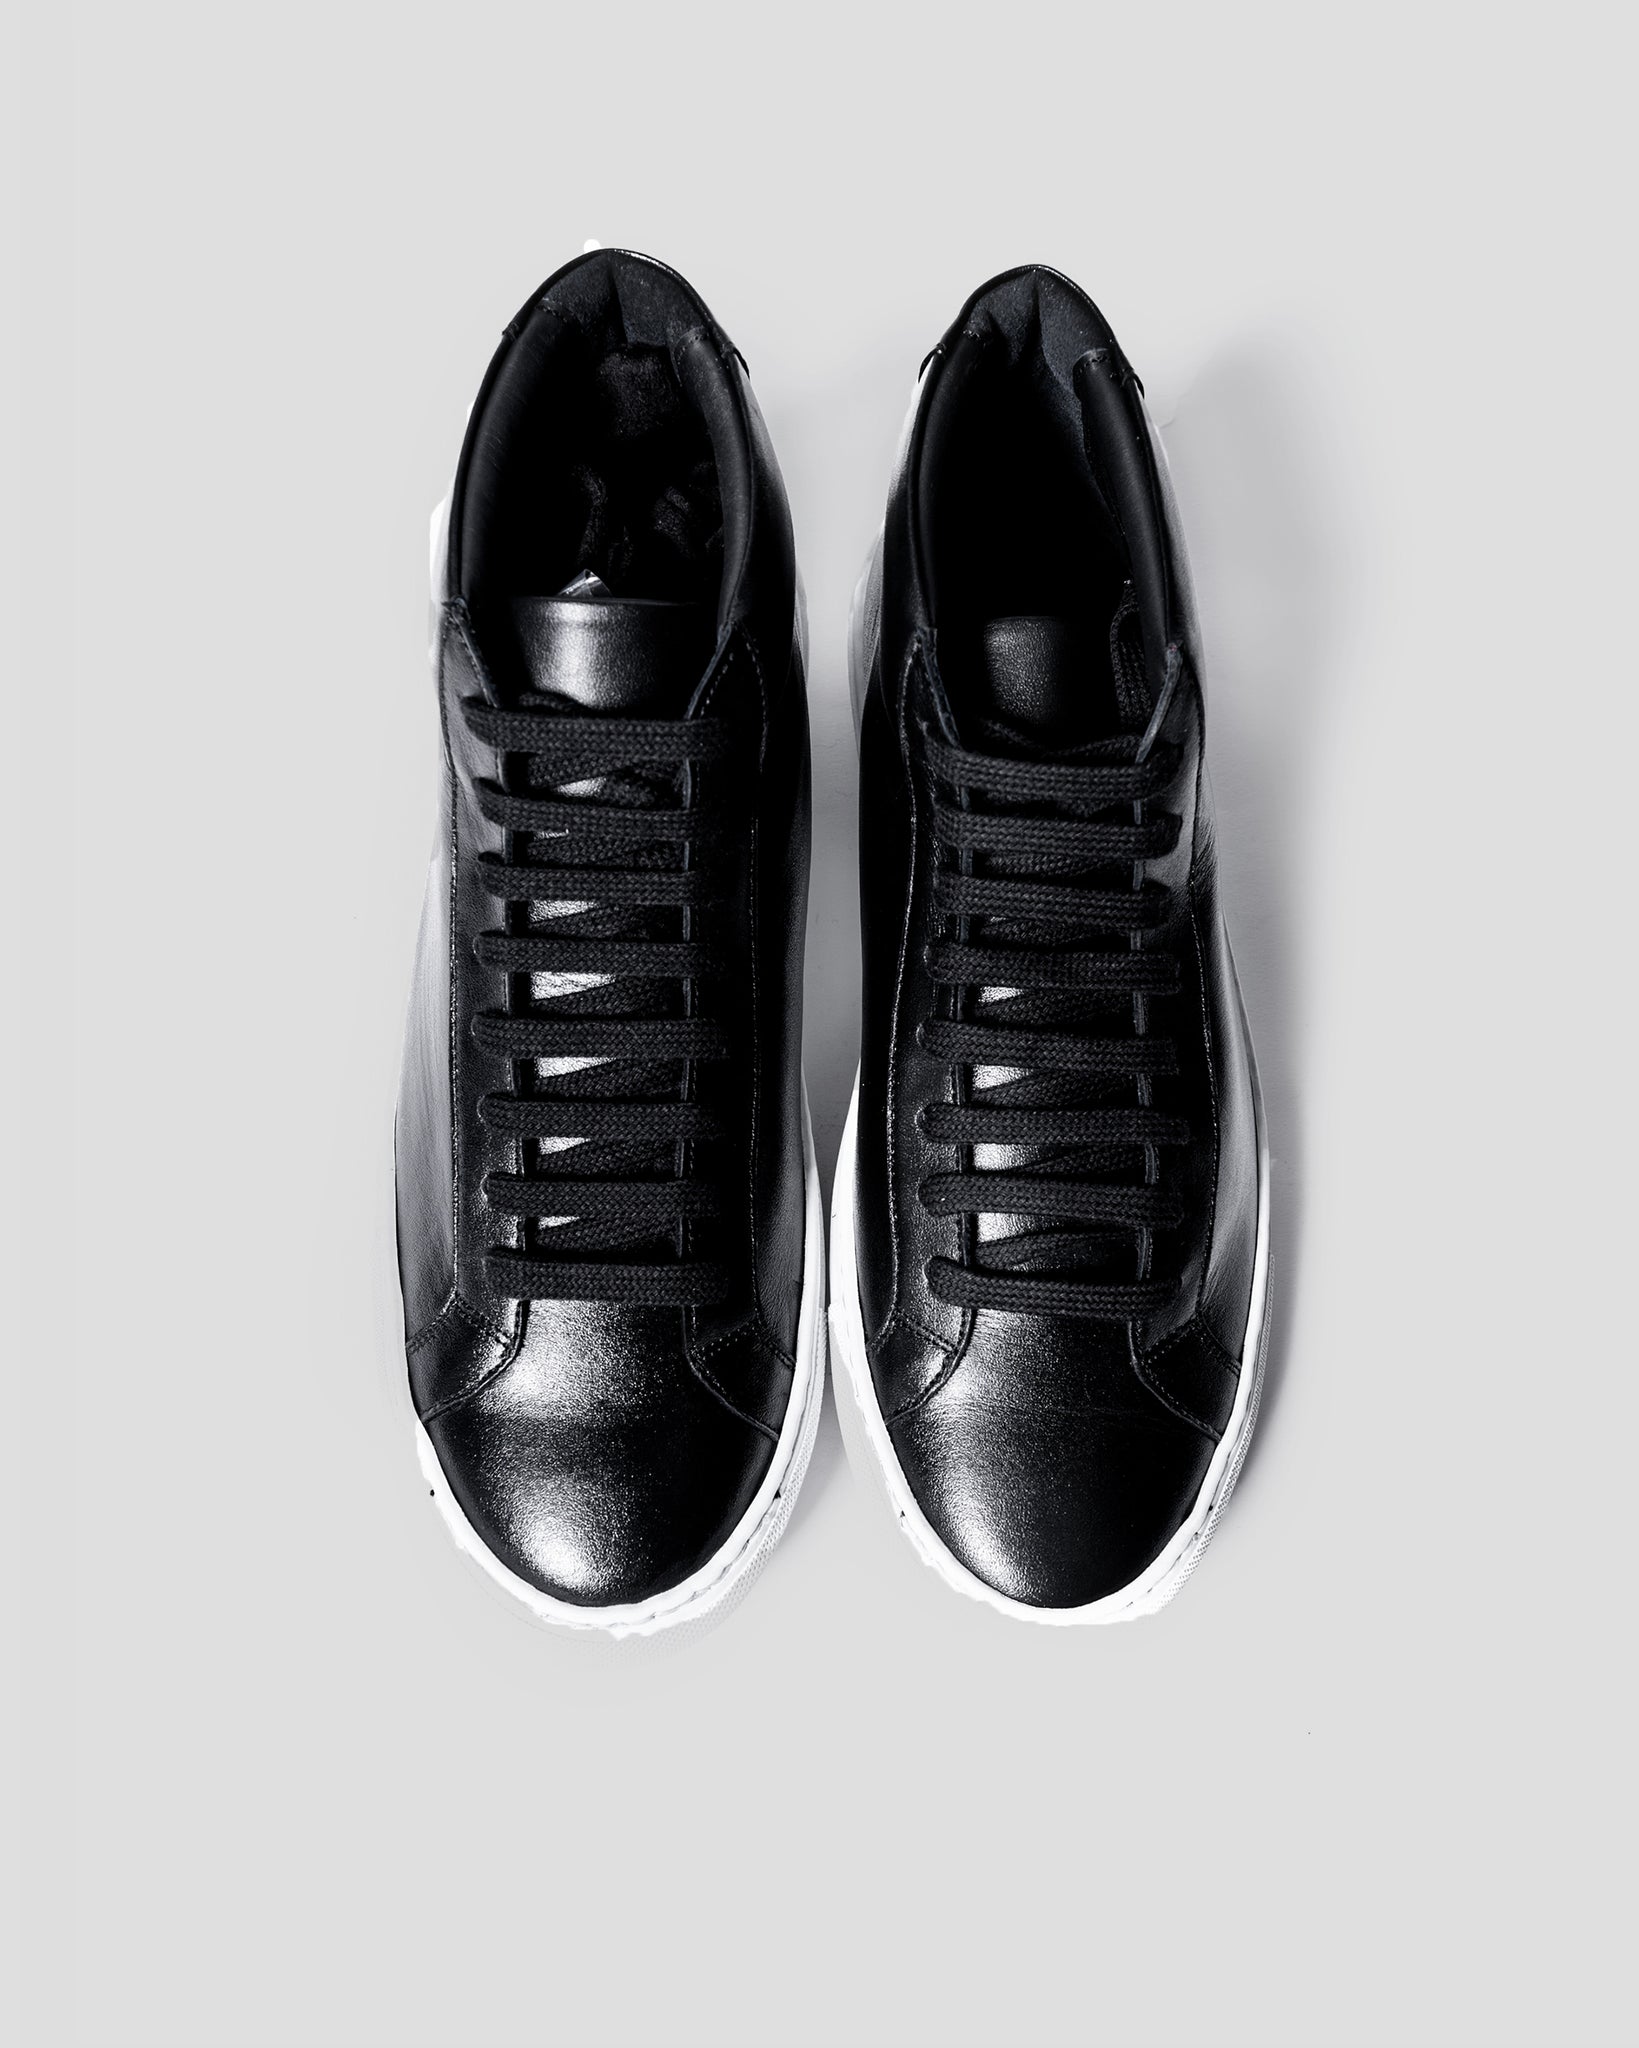 Southern Gents Classic Mid Sneaker - Black 